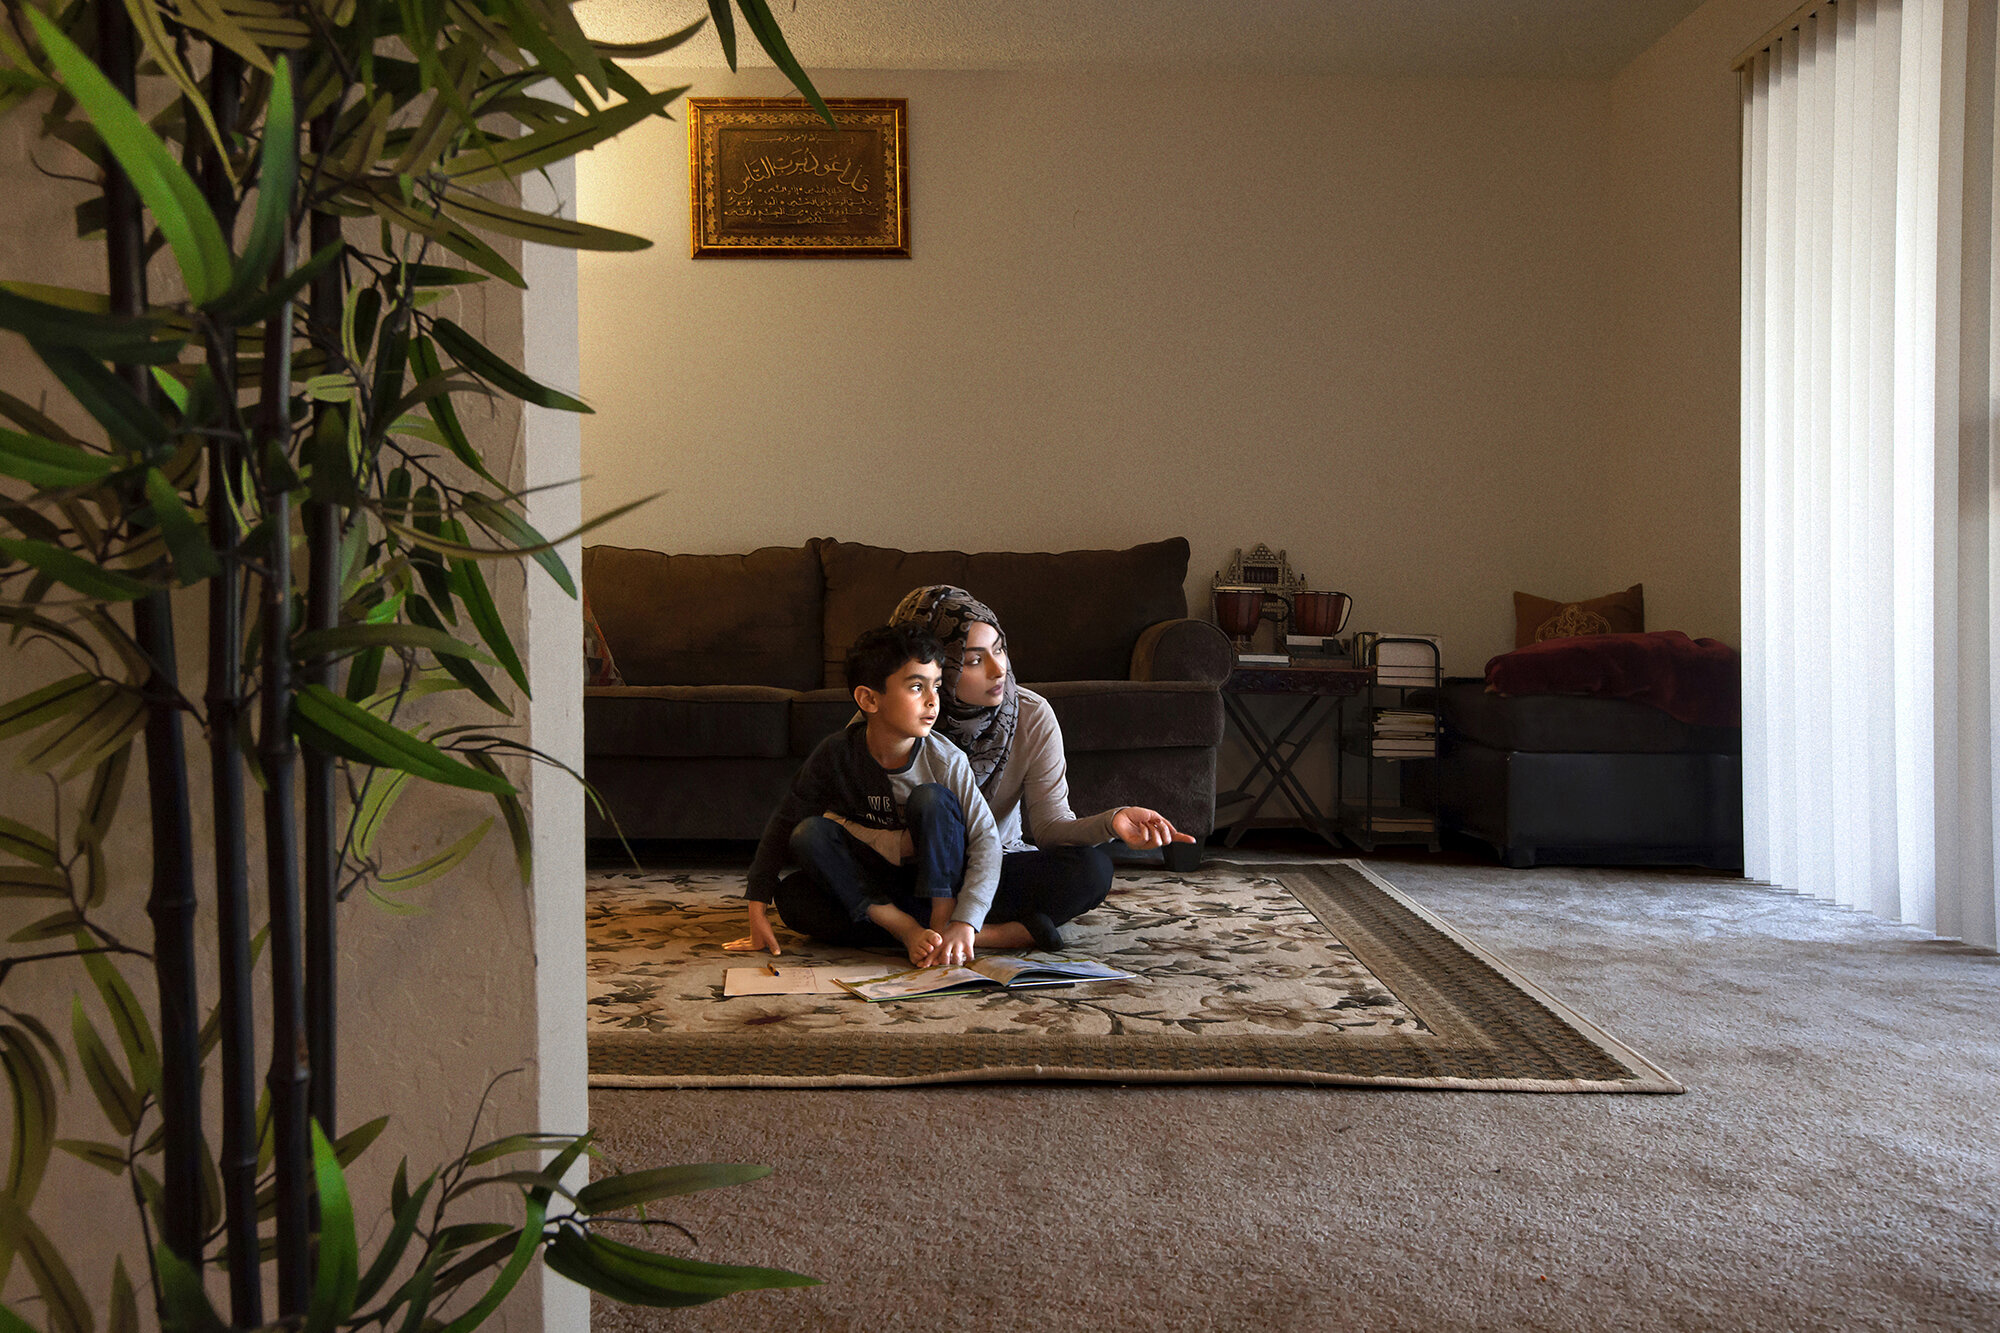   USA. Fremont, California. 2018. Jehan Hakim, 37, helps her 5-year-old son, Idrees Mubarez, to complete his school homework at their home. Jehan is a Community Advocate with the National Security and Civil Rights Program at the Asian Law Caucus (ALC